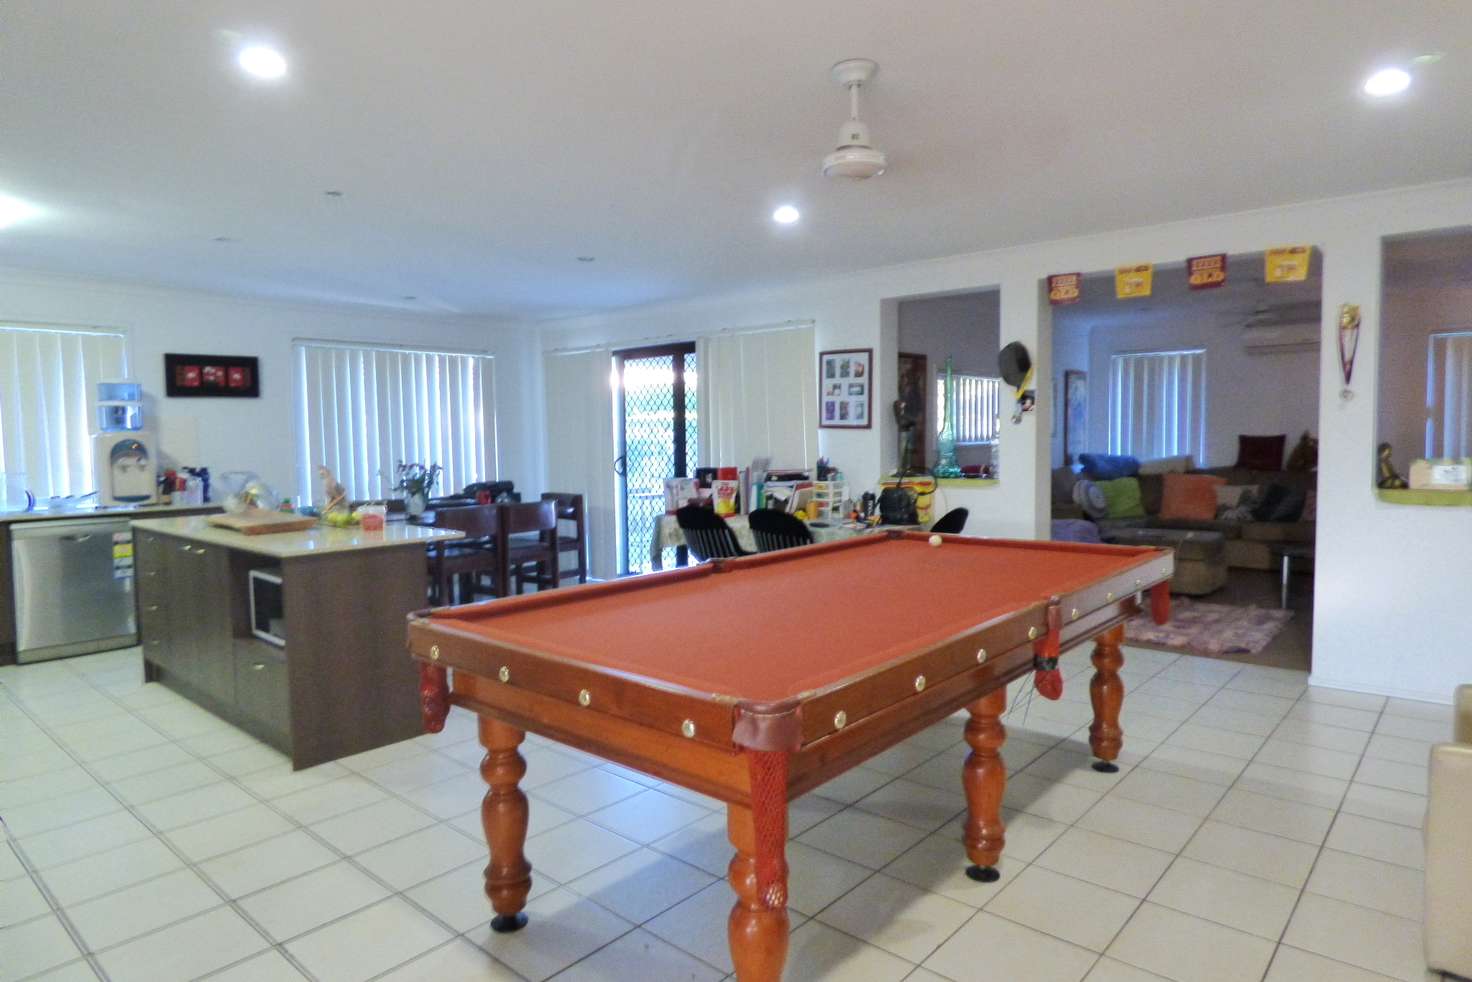 Main view of Homely house listing, 33 Clementine St, Bellmere QLD 4510